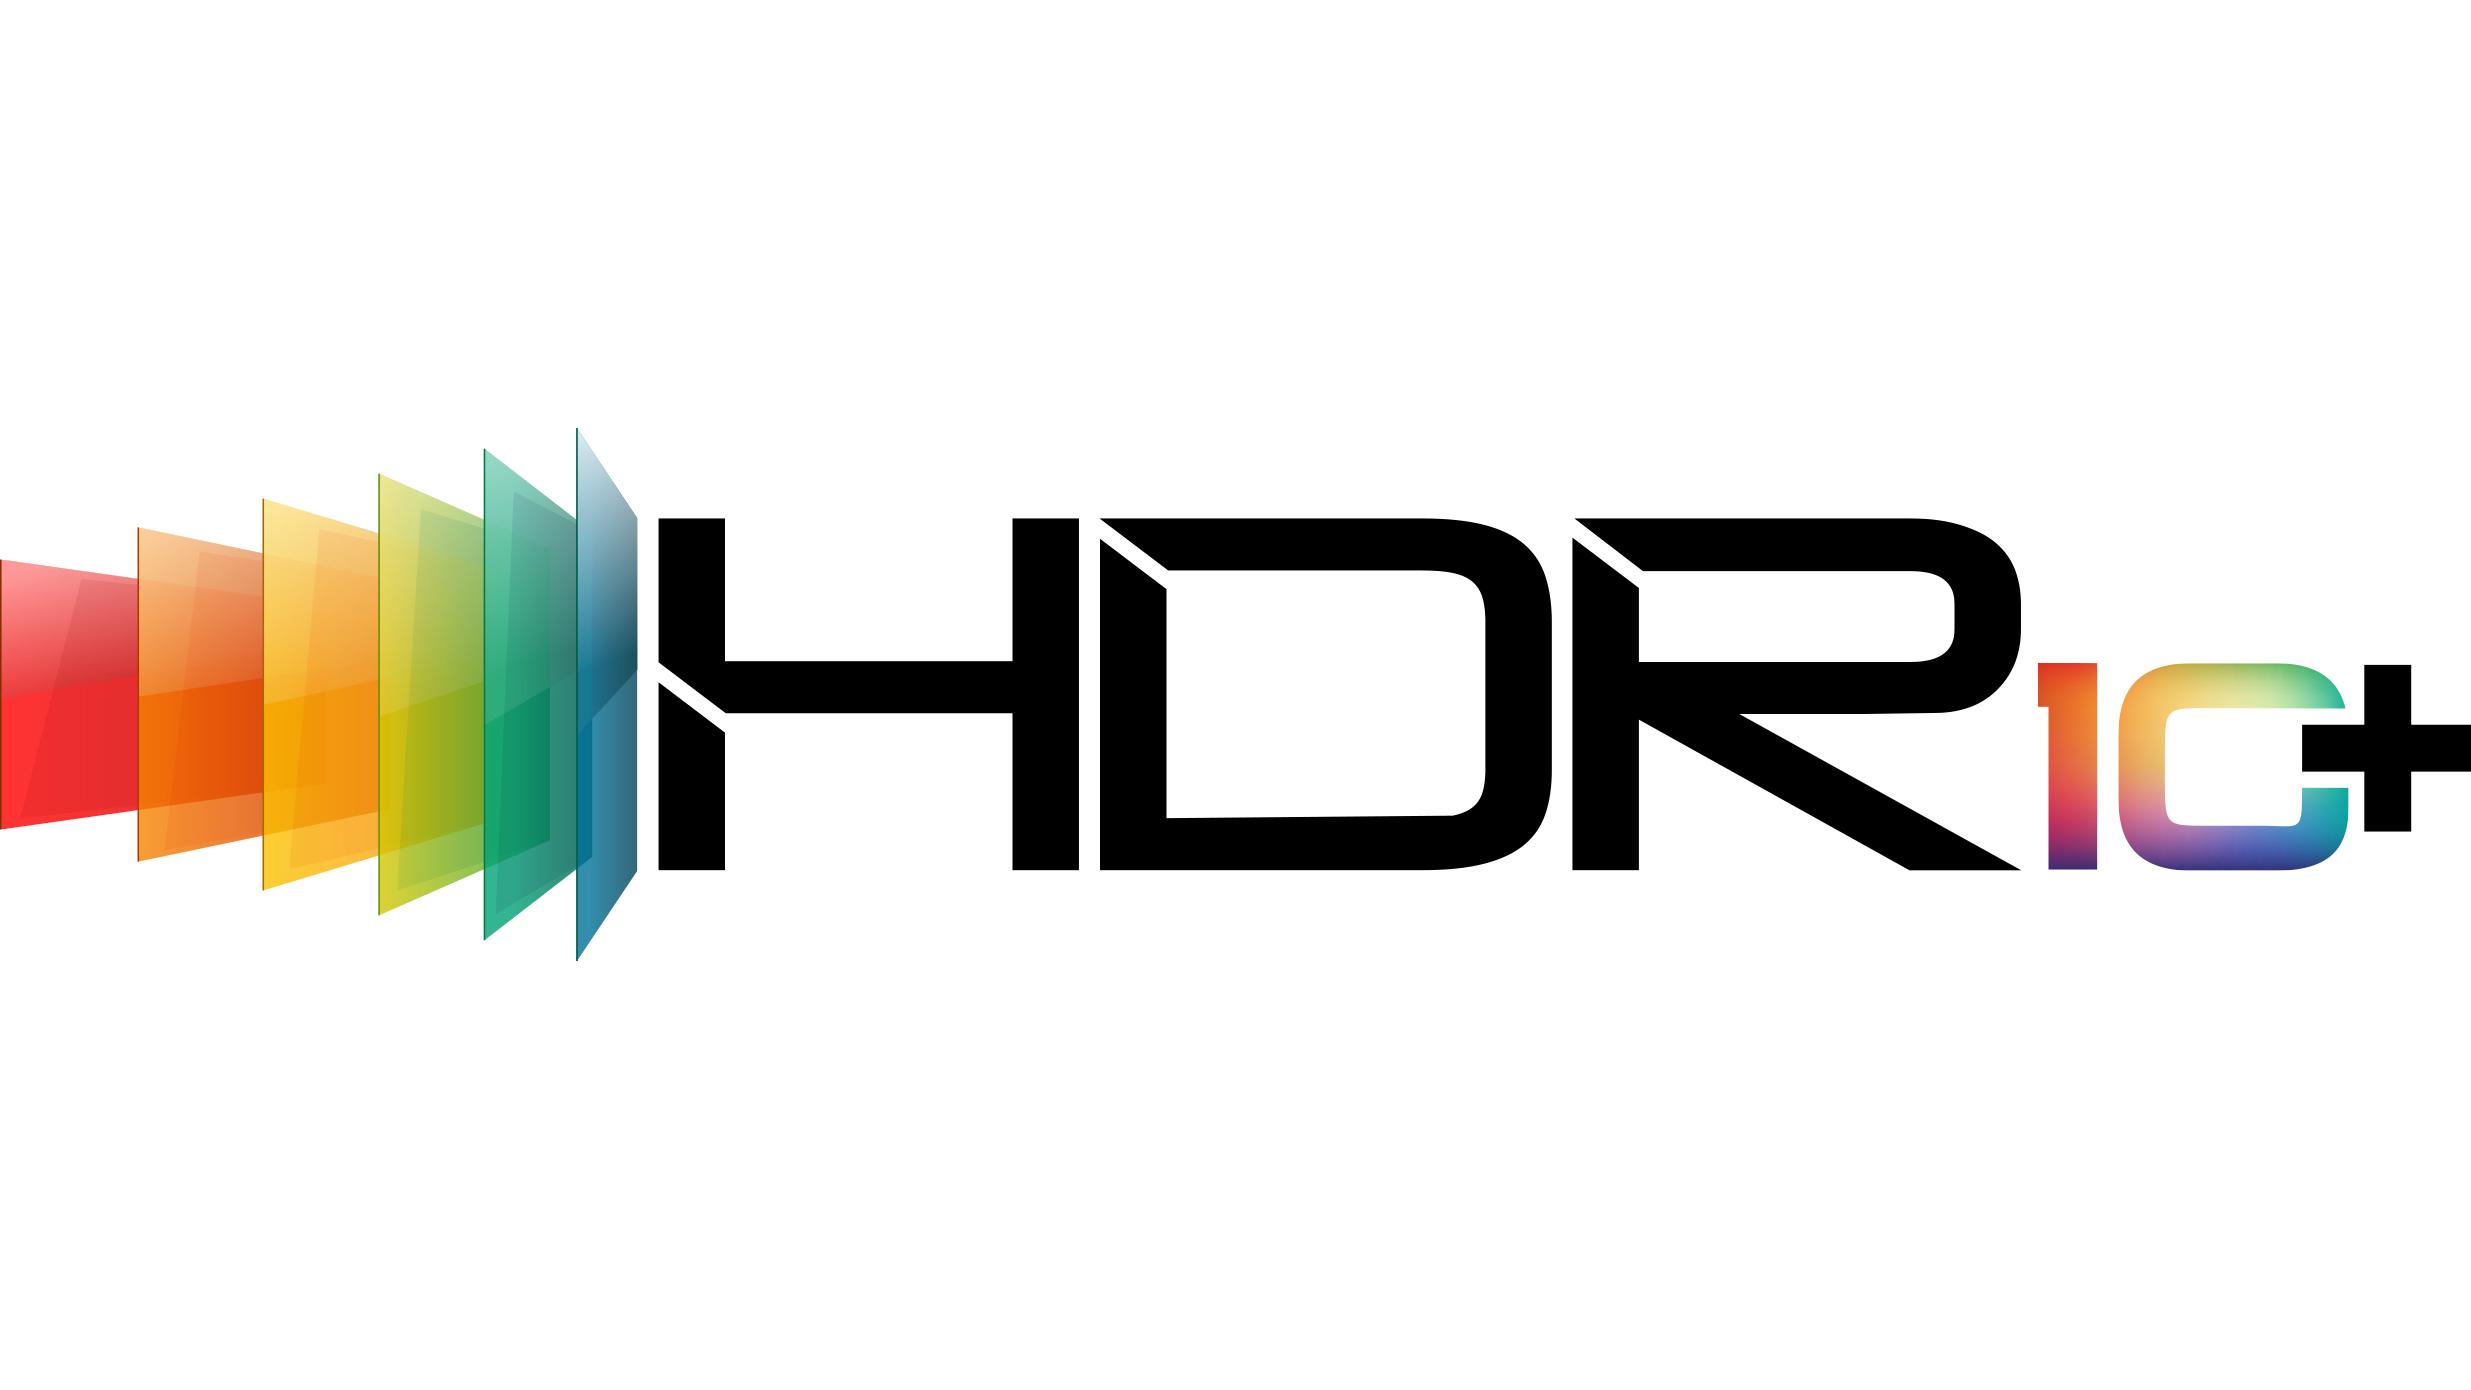 image: HDR10+ logo in color